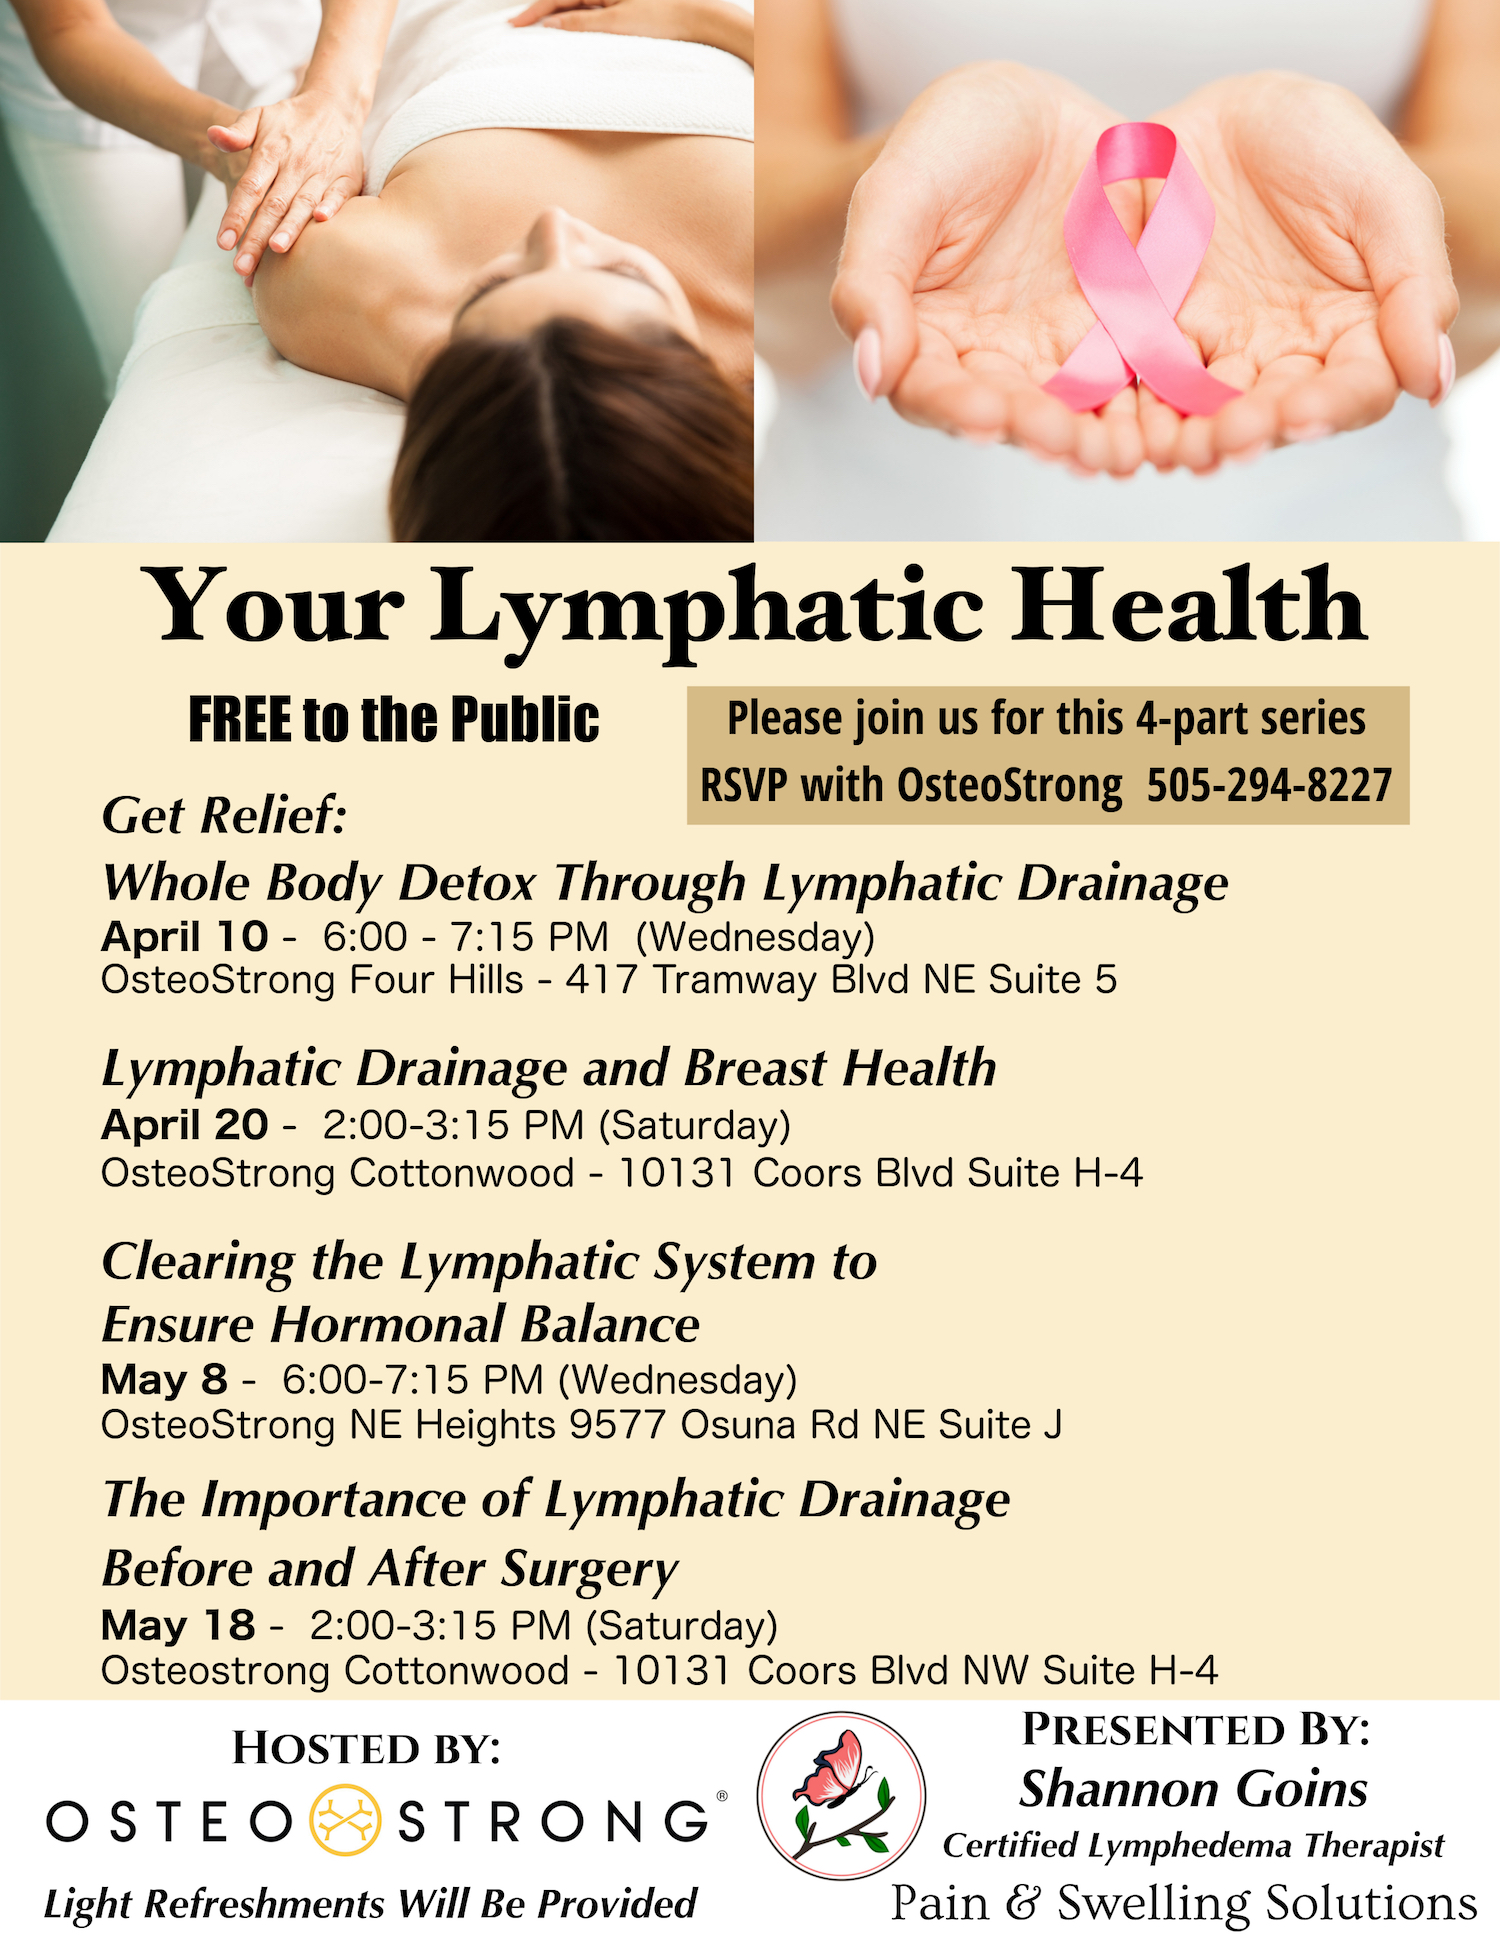 Osteostrong Brochure Events - Your Lymphatic Health Lecture